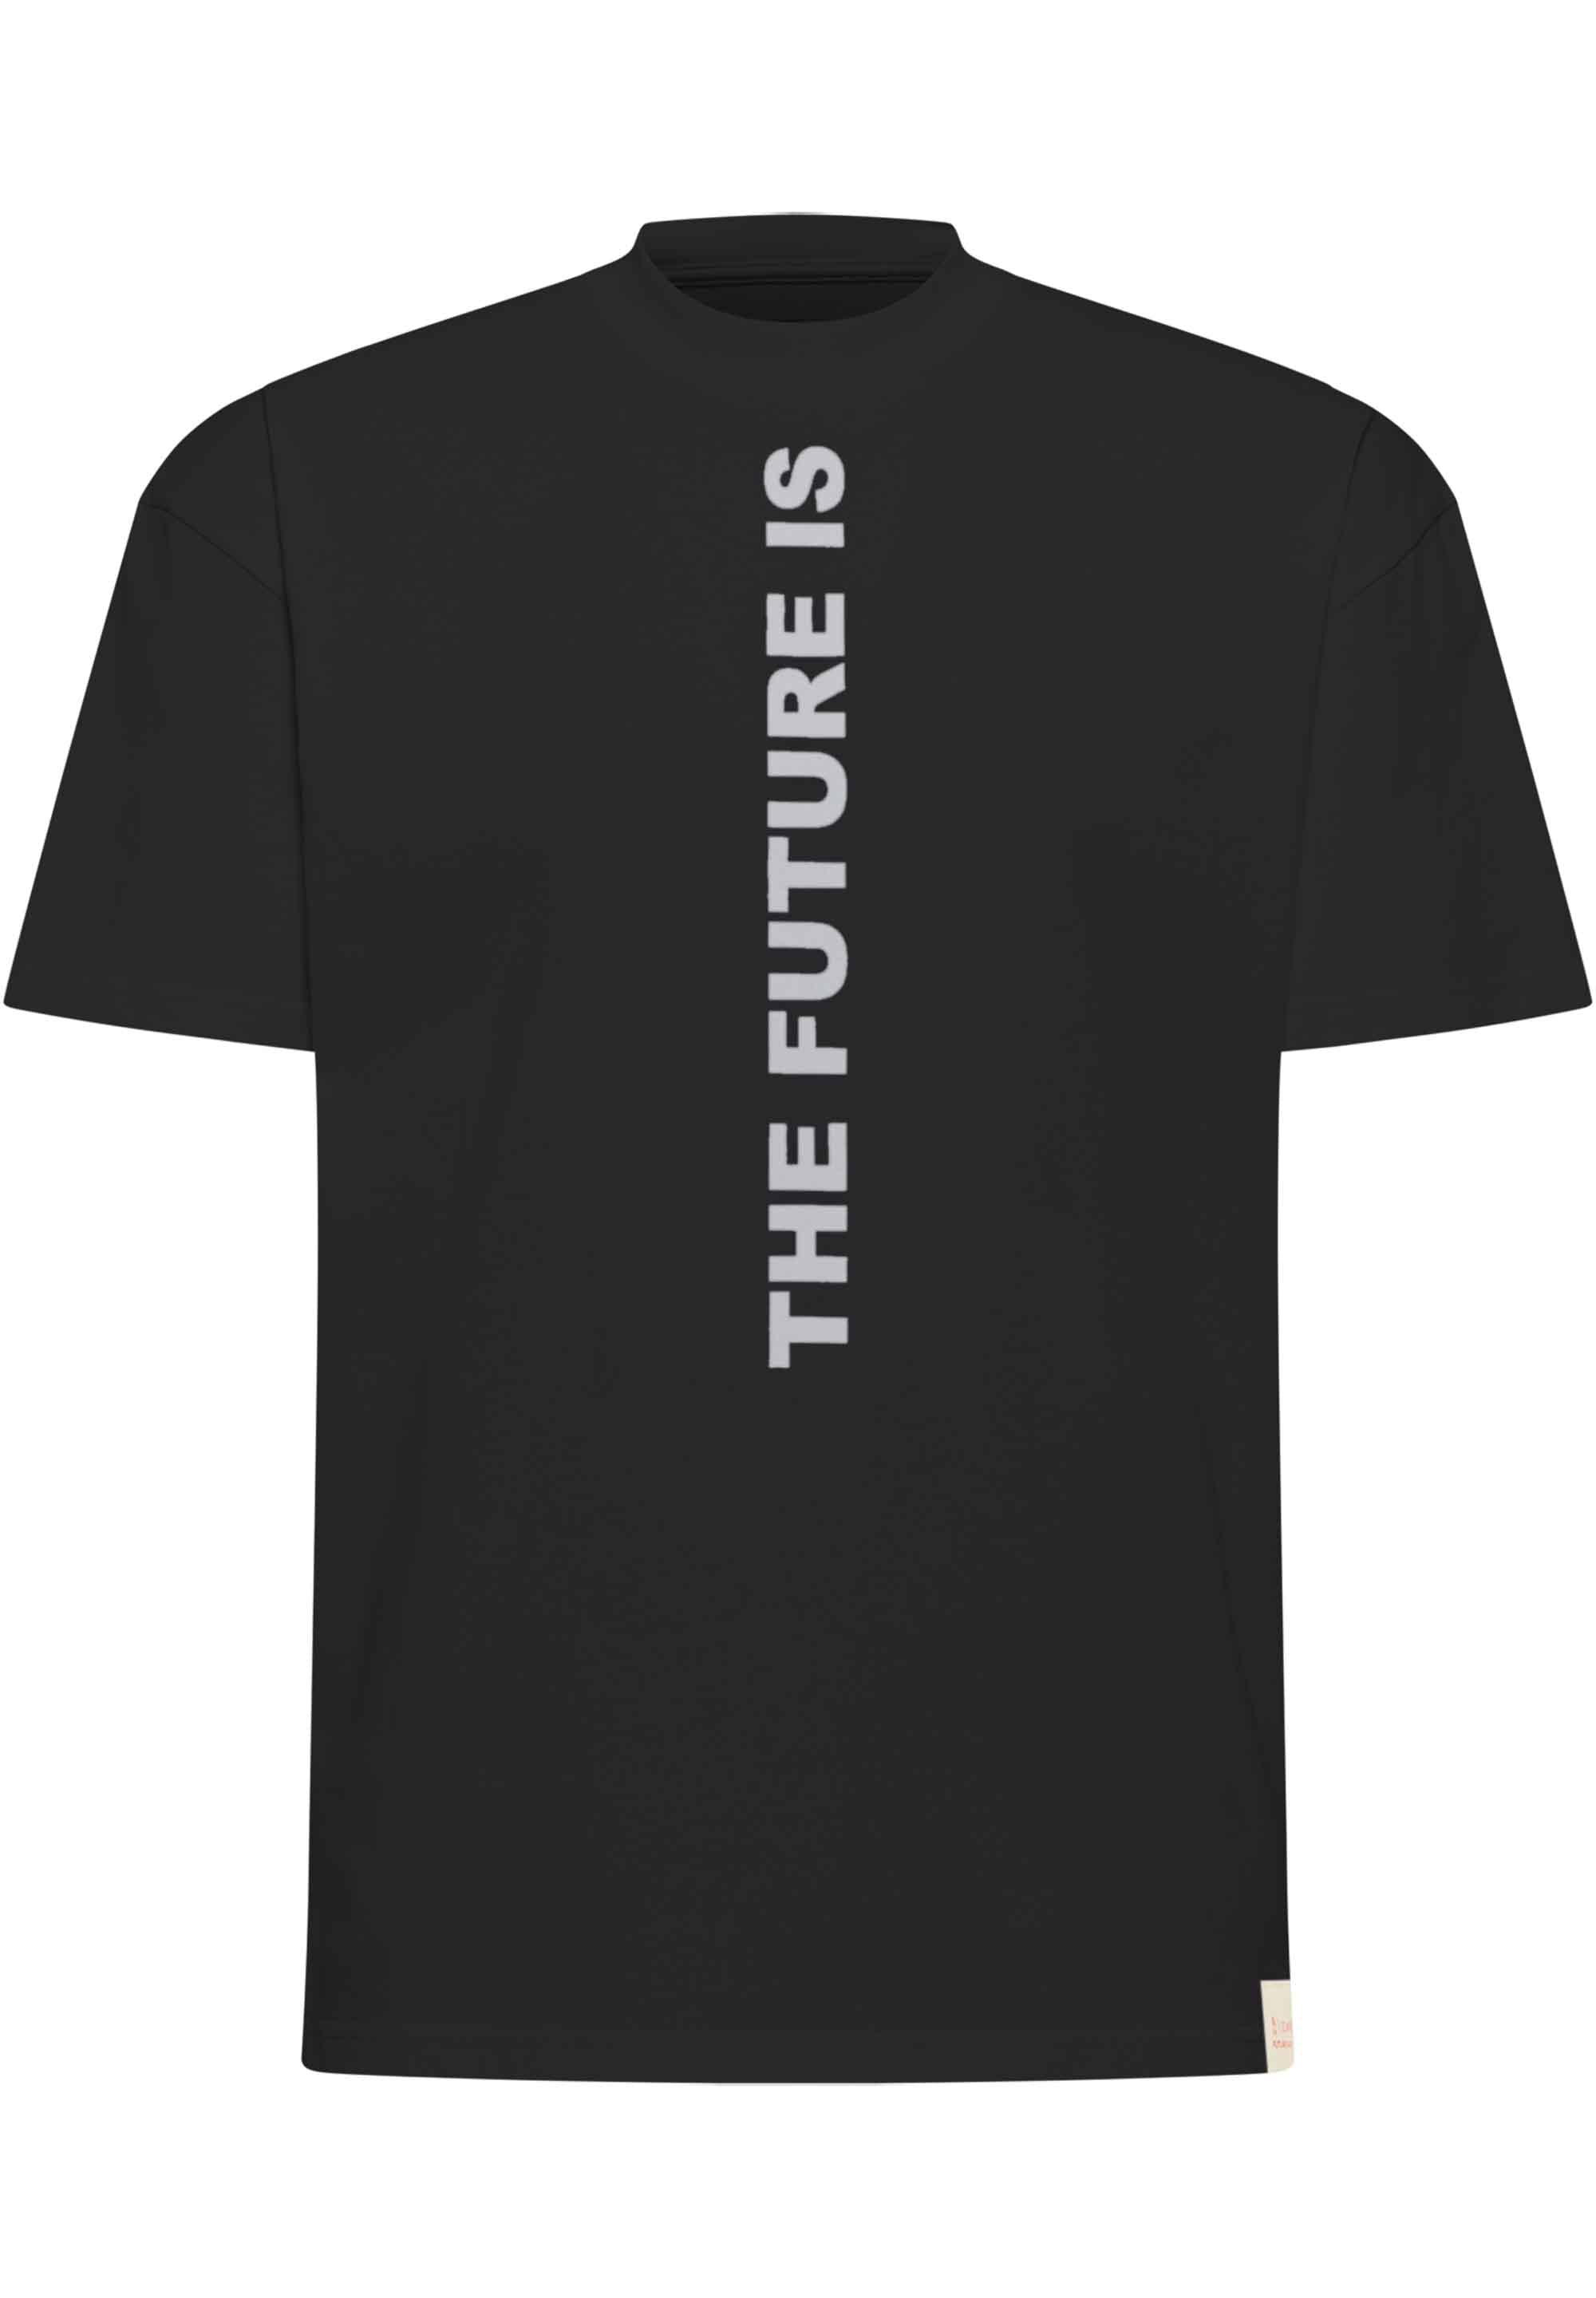 SOMWR THE FUTURE IS SOMWR T-Shirt BLK000